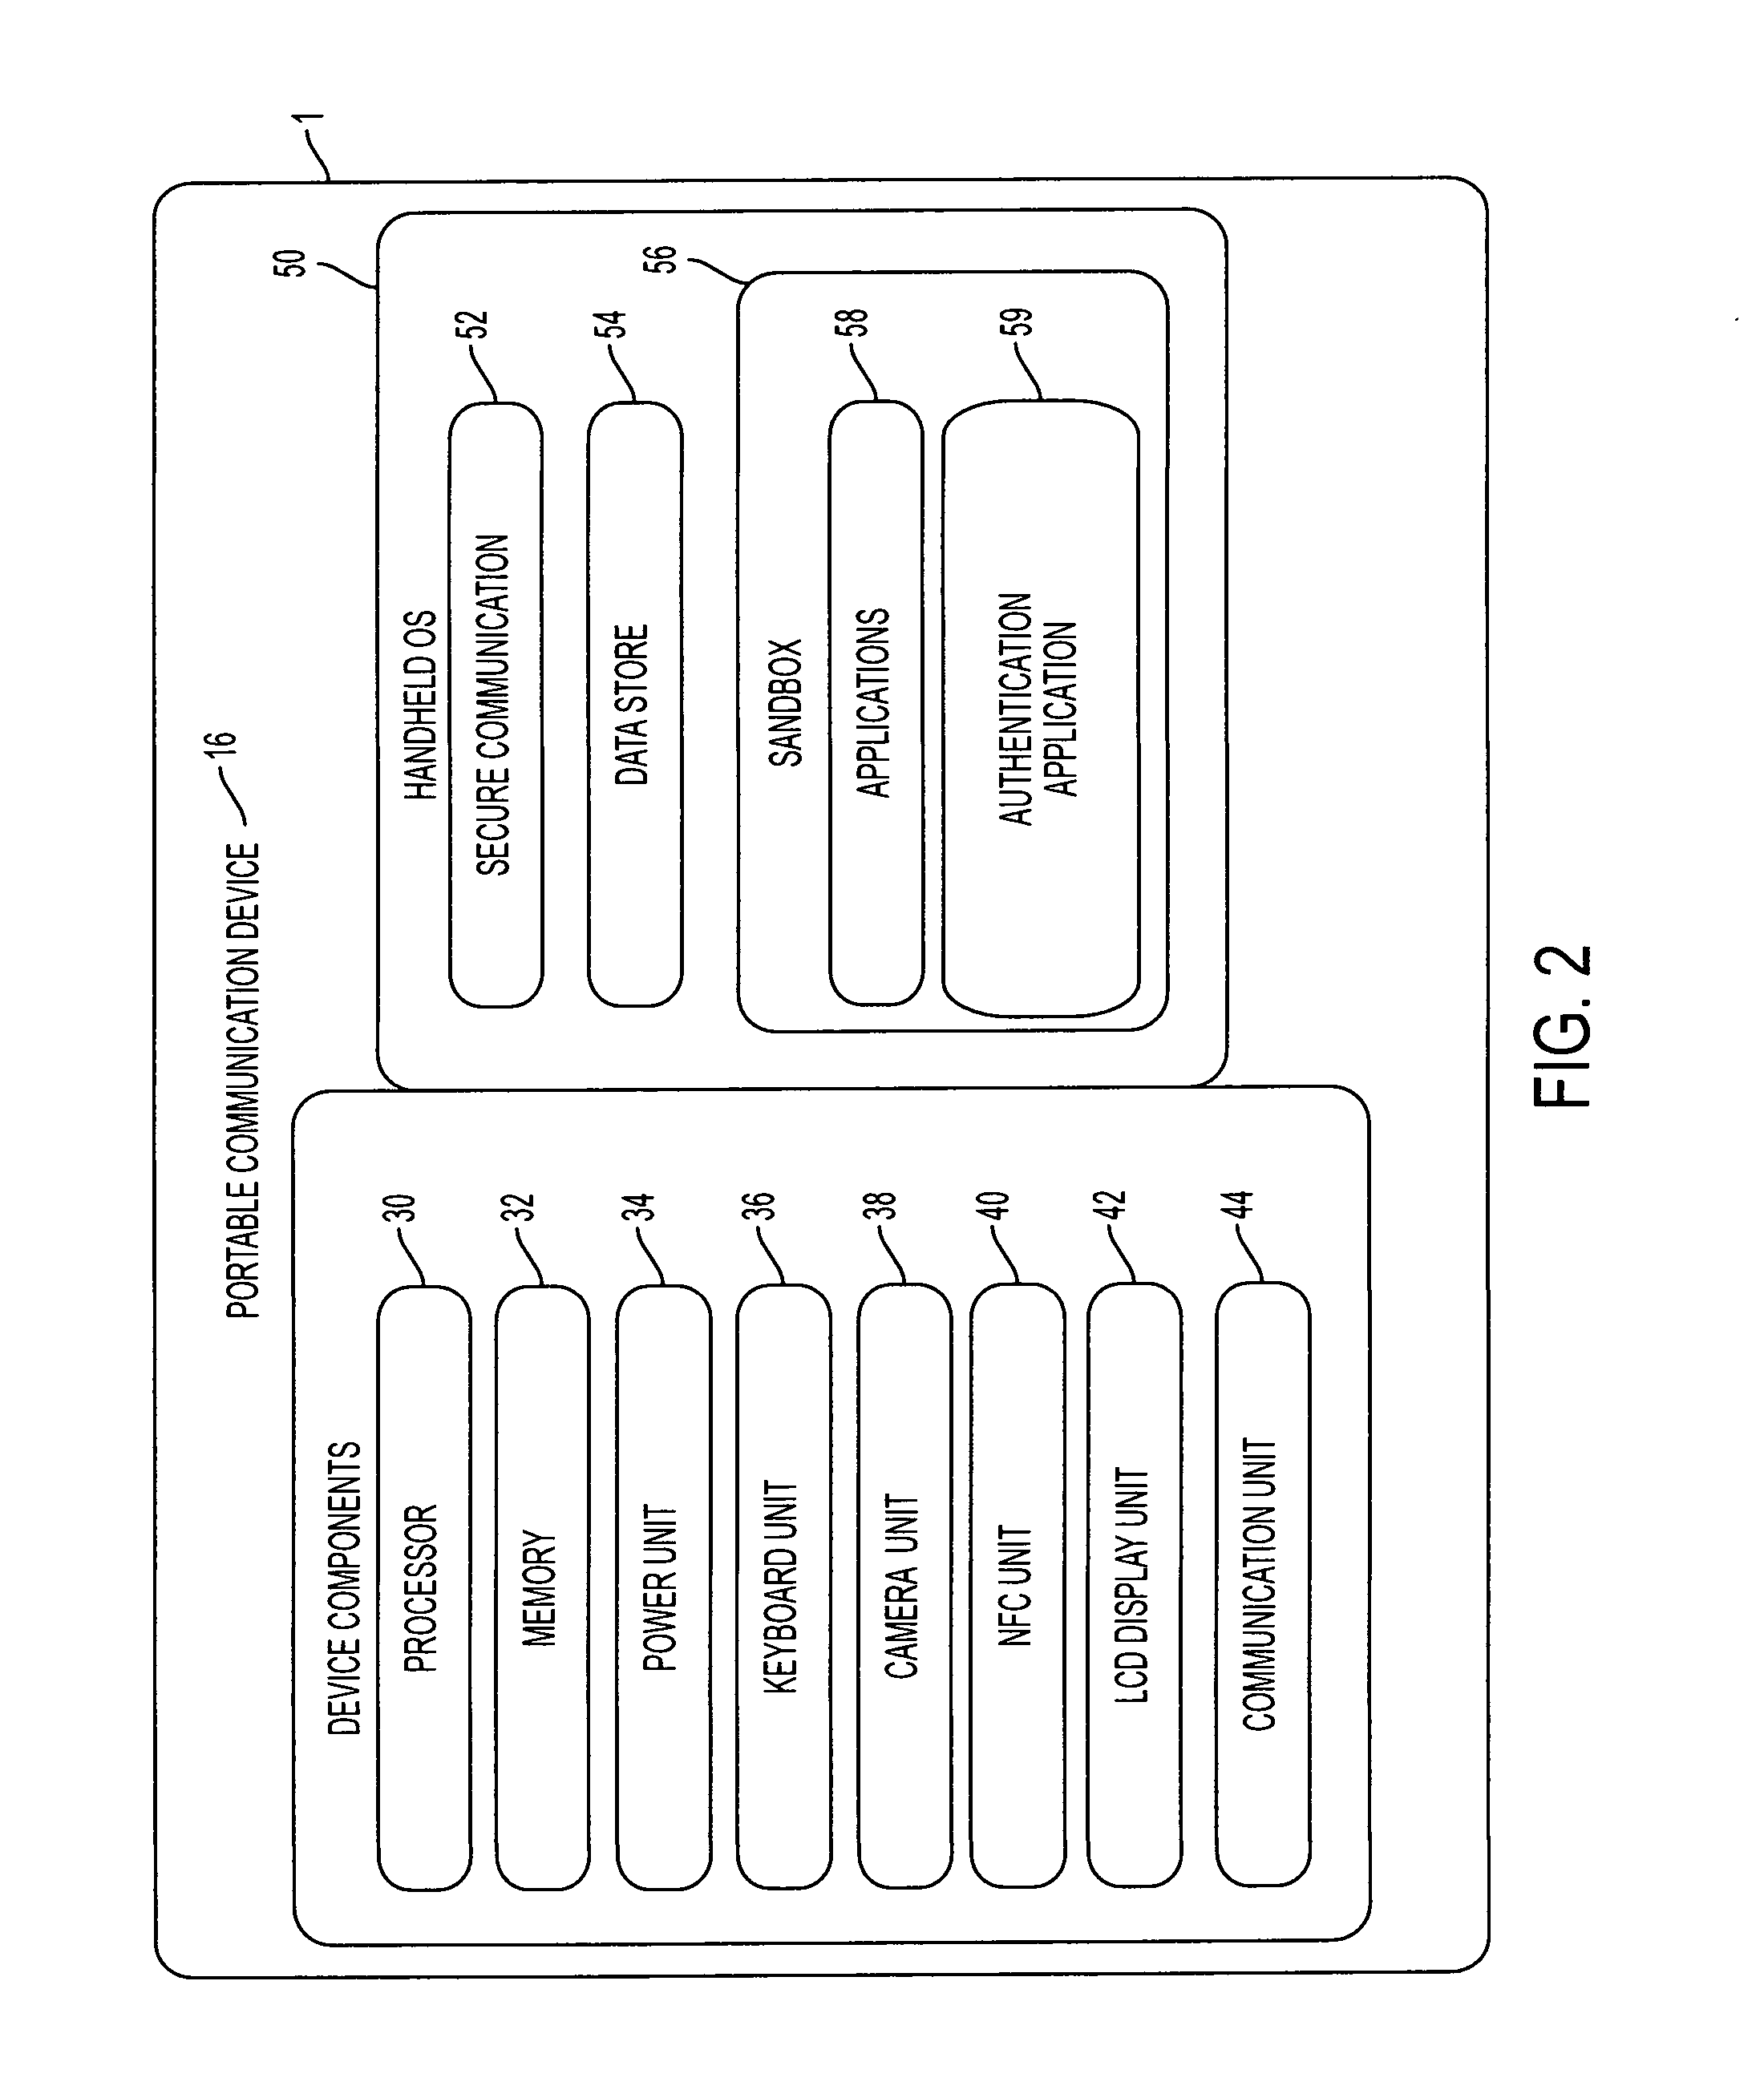 System, Design and Process for Secure Documents Credentials Management Using Out-of-Band Authentication